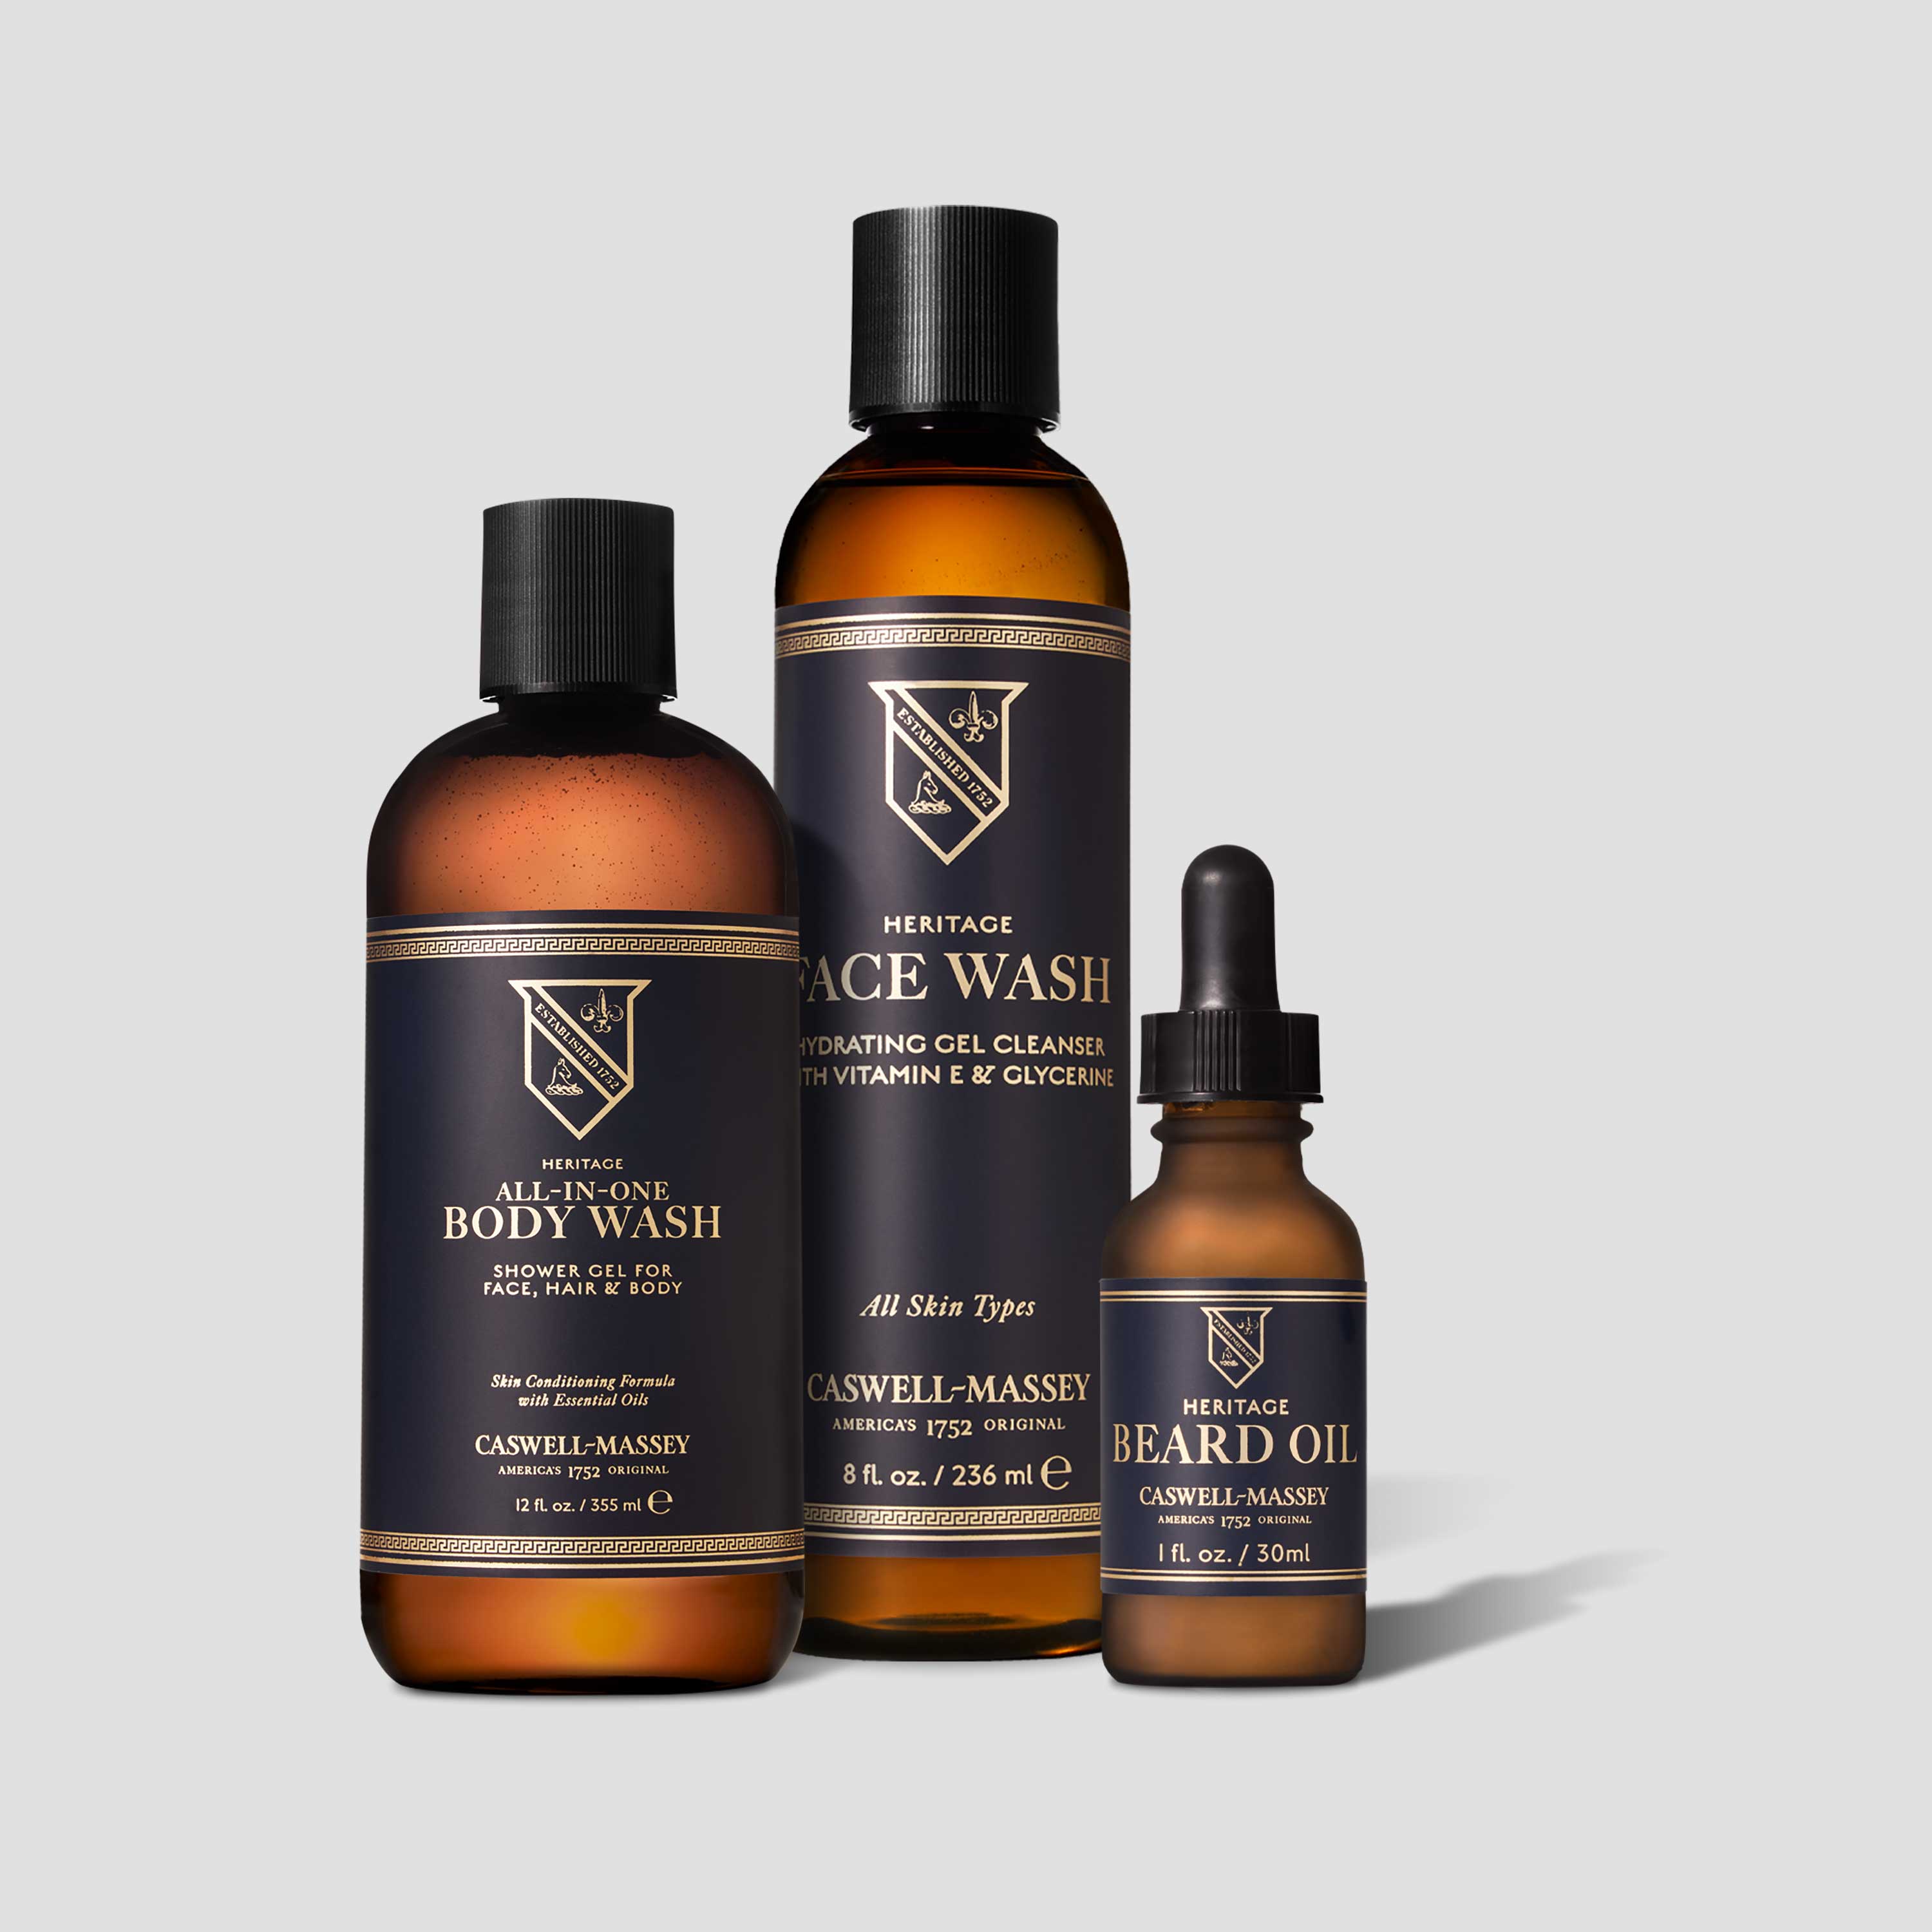 Caswell-Massey men's skincare regimen including the Heritage Face & Beard Oil with the Heritage Face Wash and Heritage All-in-One Body Wash